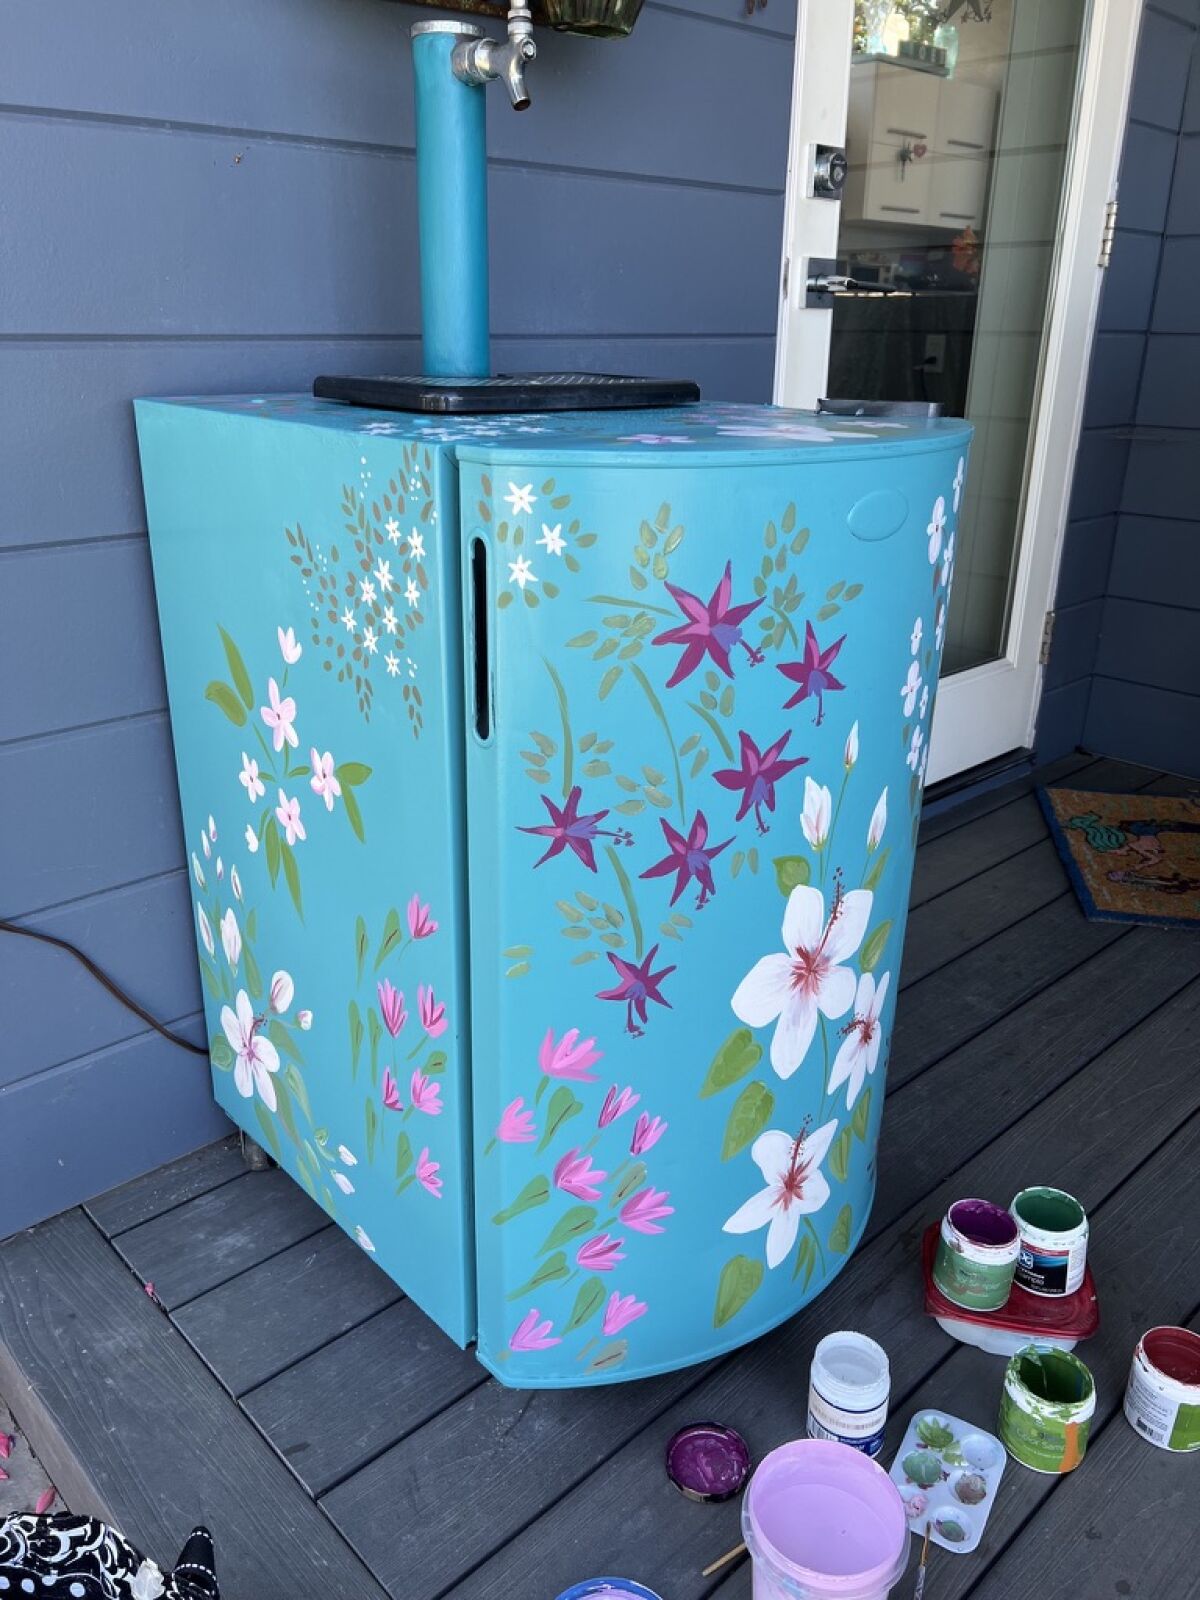 Diane Lehman's floral painting gave new vibrancy to this formerly "rusted and awful” kegerator outside Jill Johnson's home.